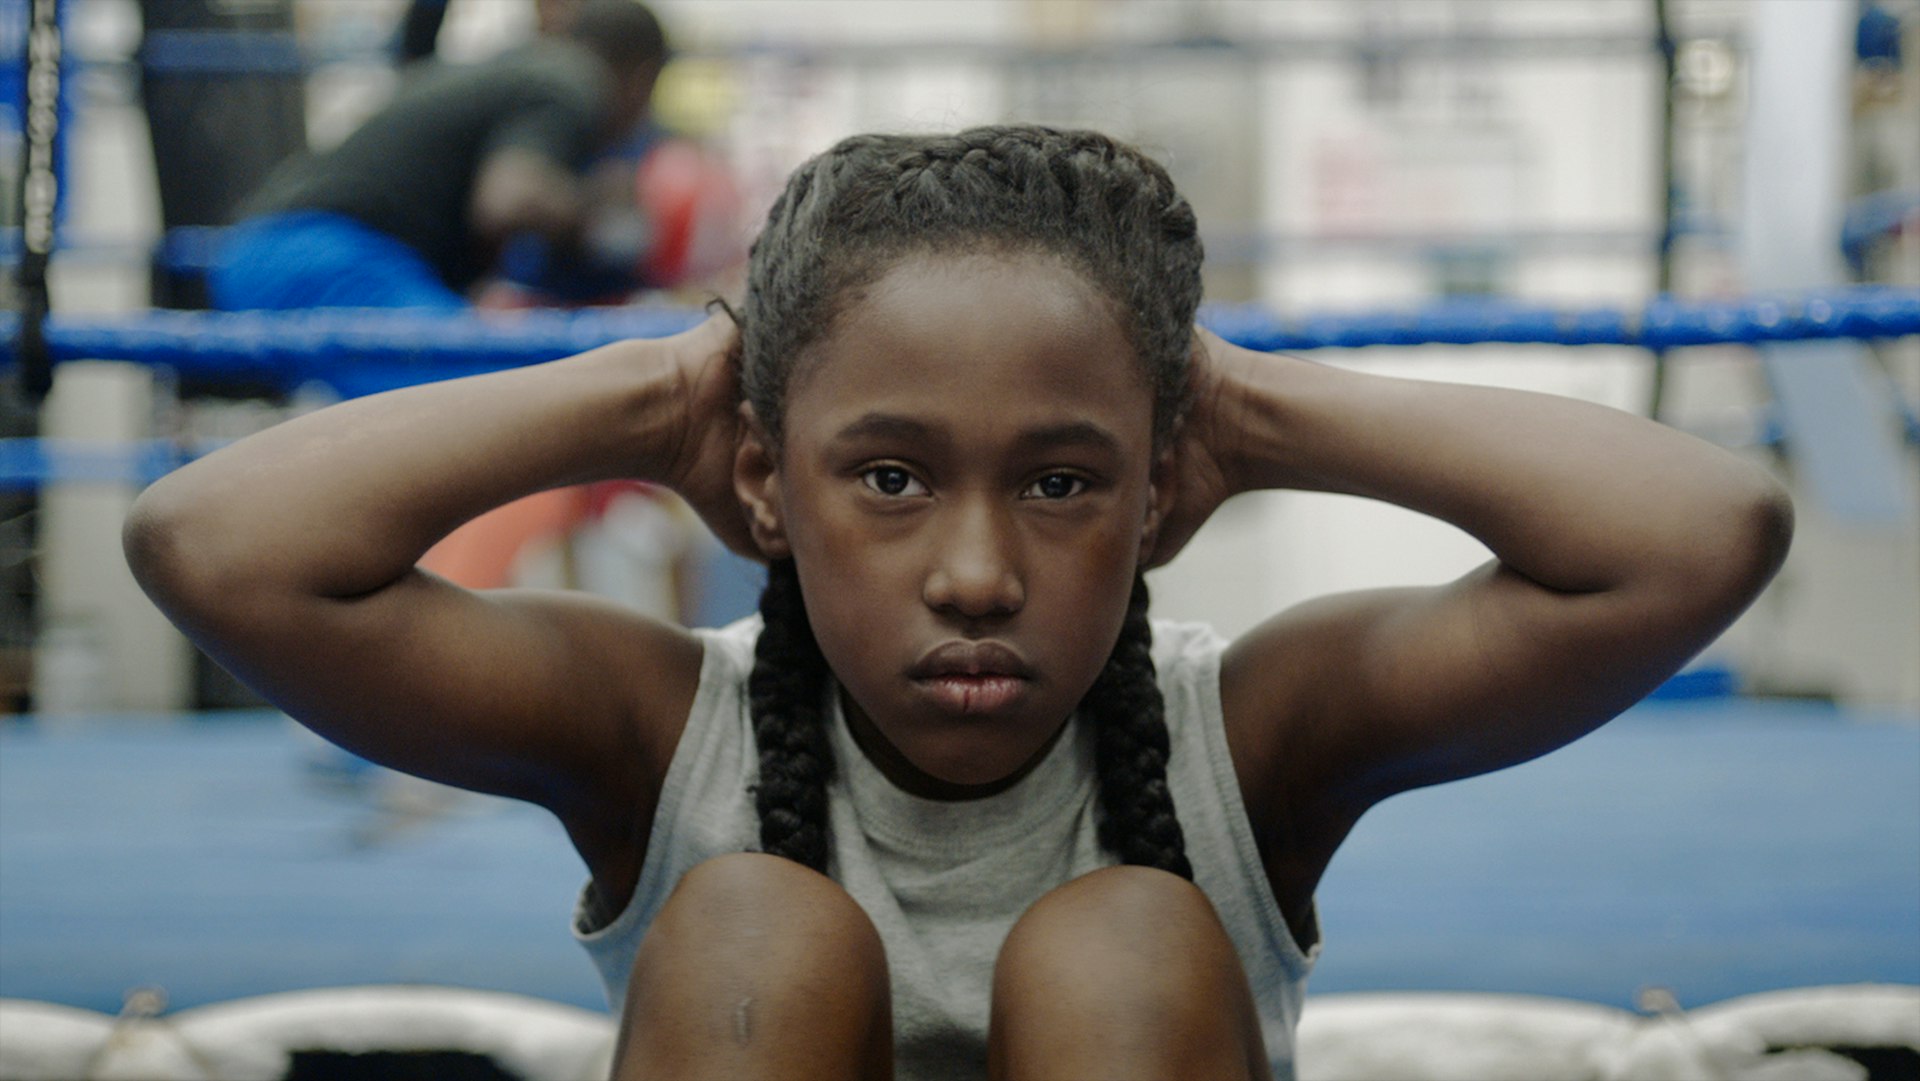 Director Anna Rose Holmer on her daunting film The Fits